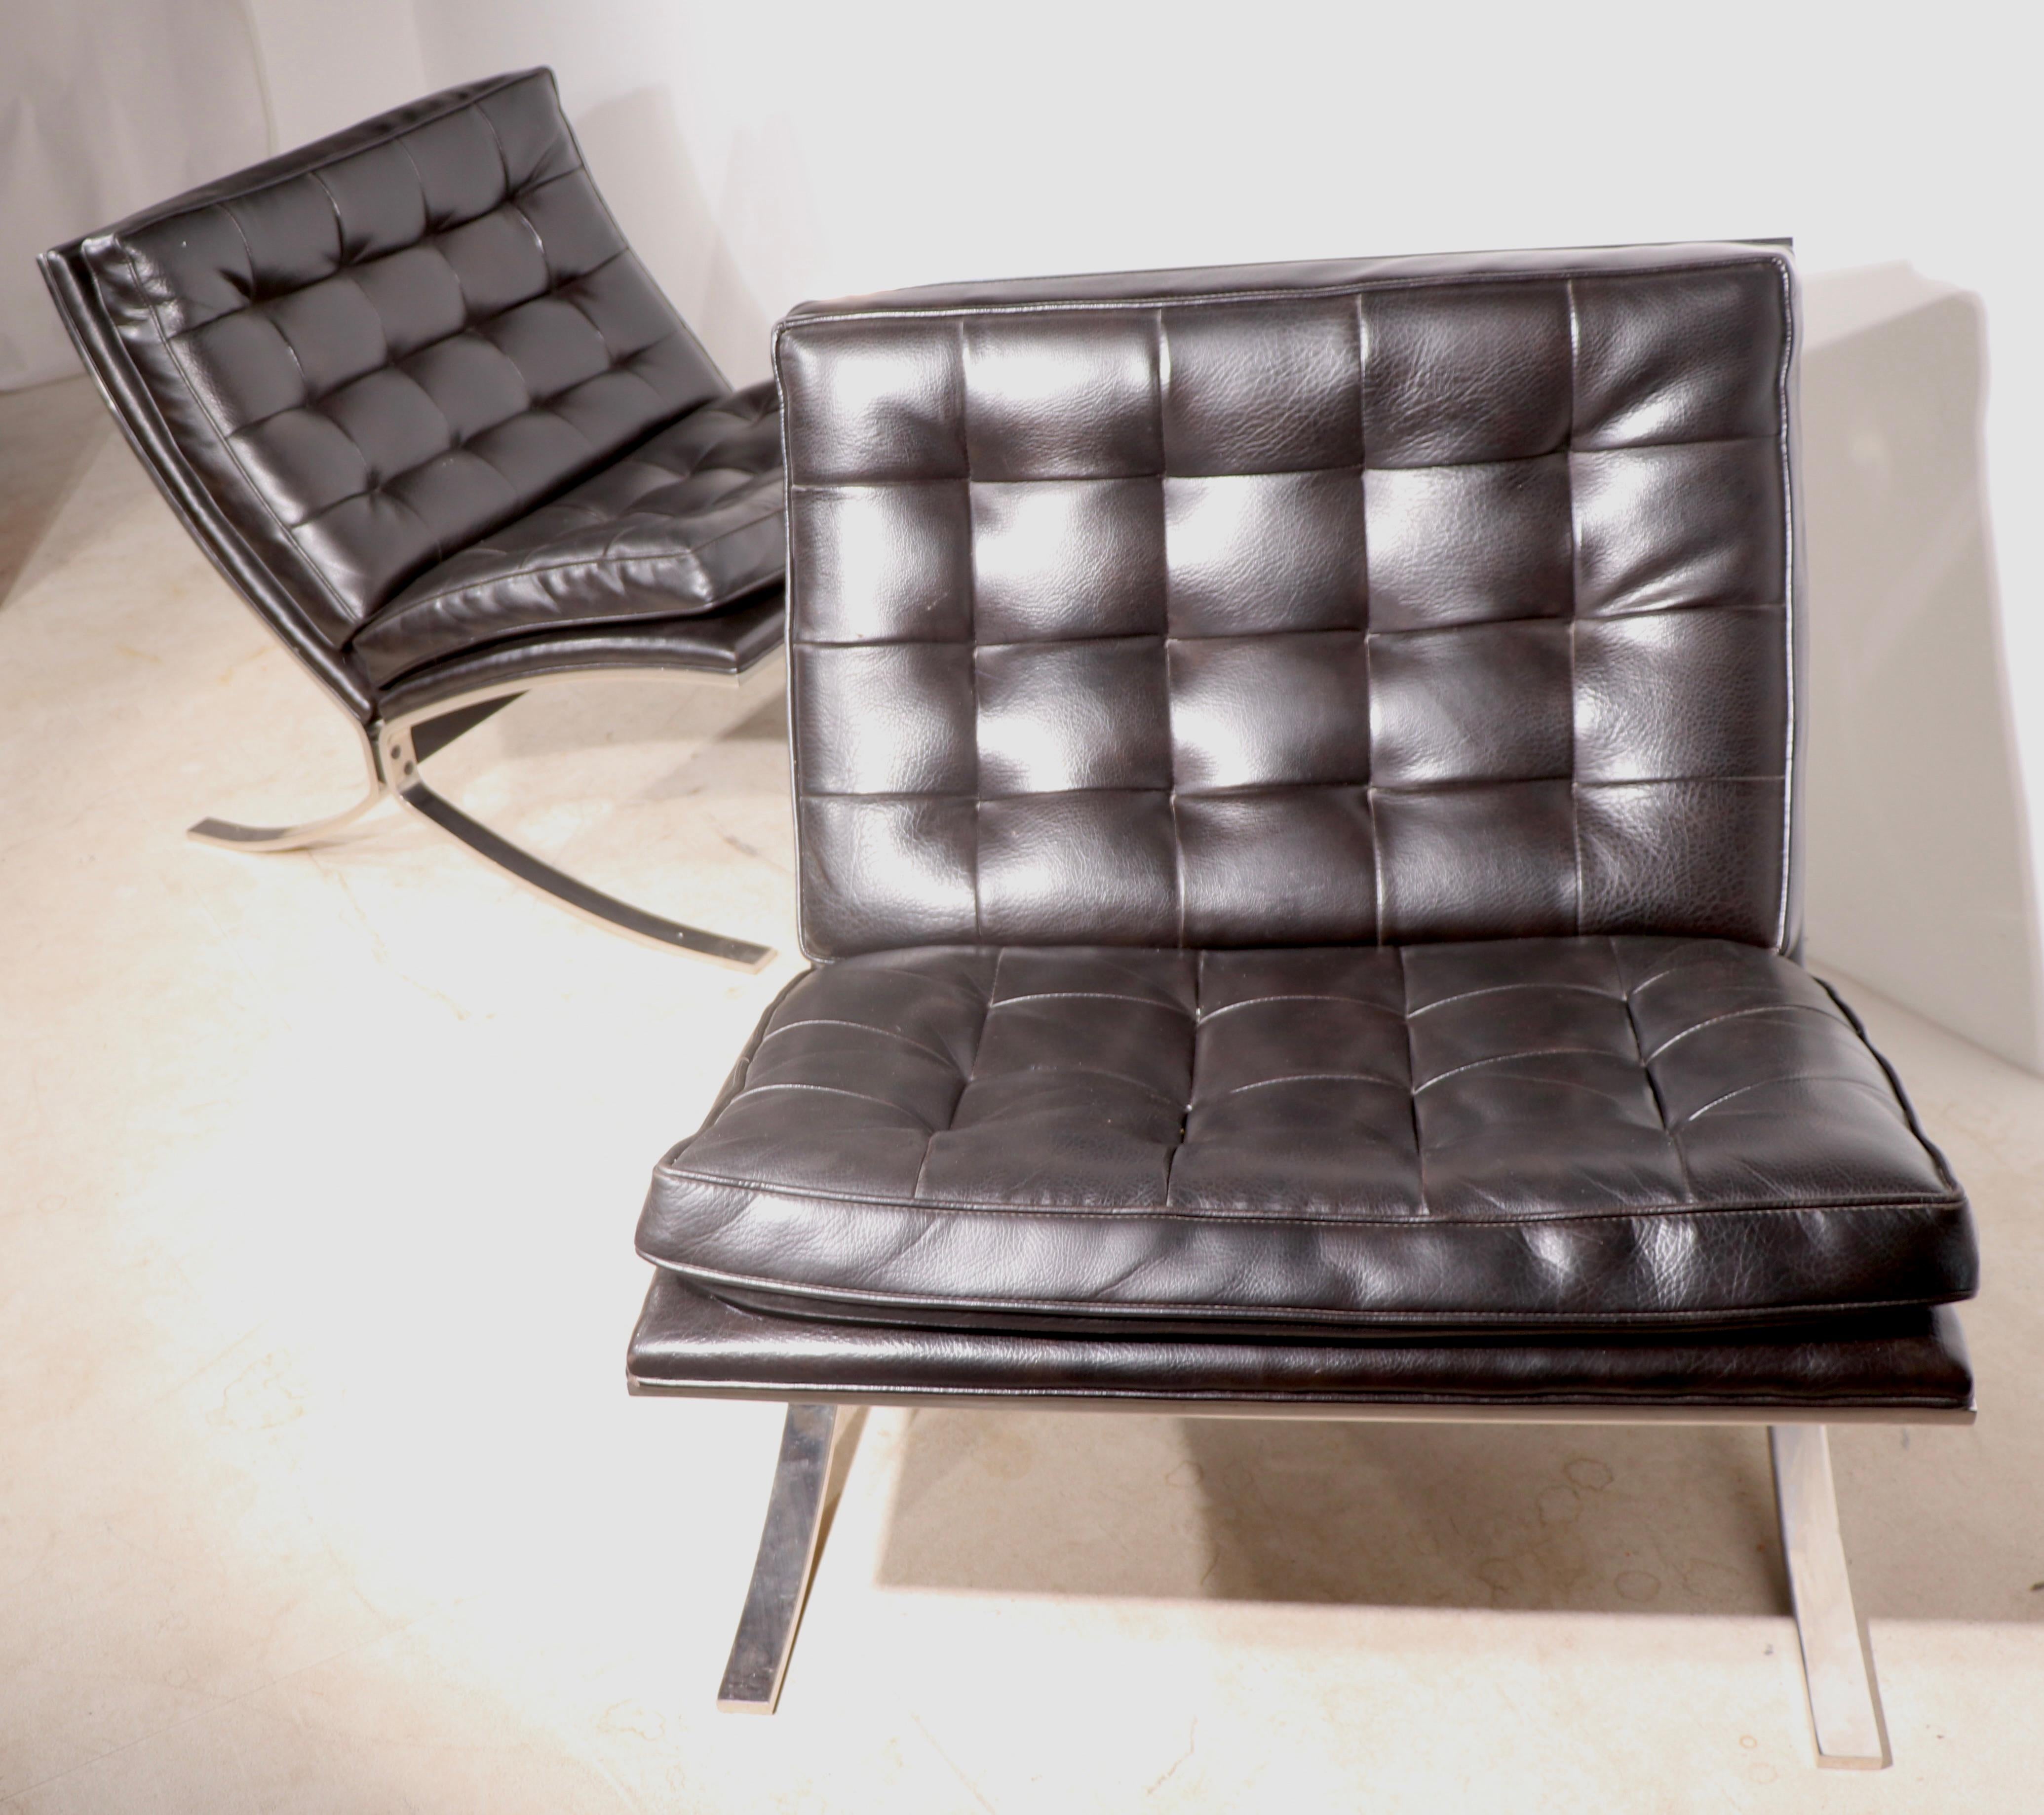 Rare pair of Barcelona style lounge chairs, designed by Kipp Stewart for Drexel. Like the iconic Mies chair, but the American designed and made version. These chairs  are actually much harder to come by, as the production was smaller and shorter in